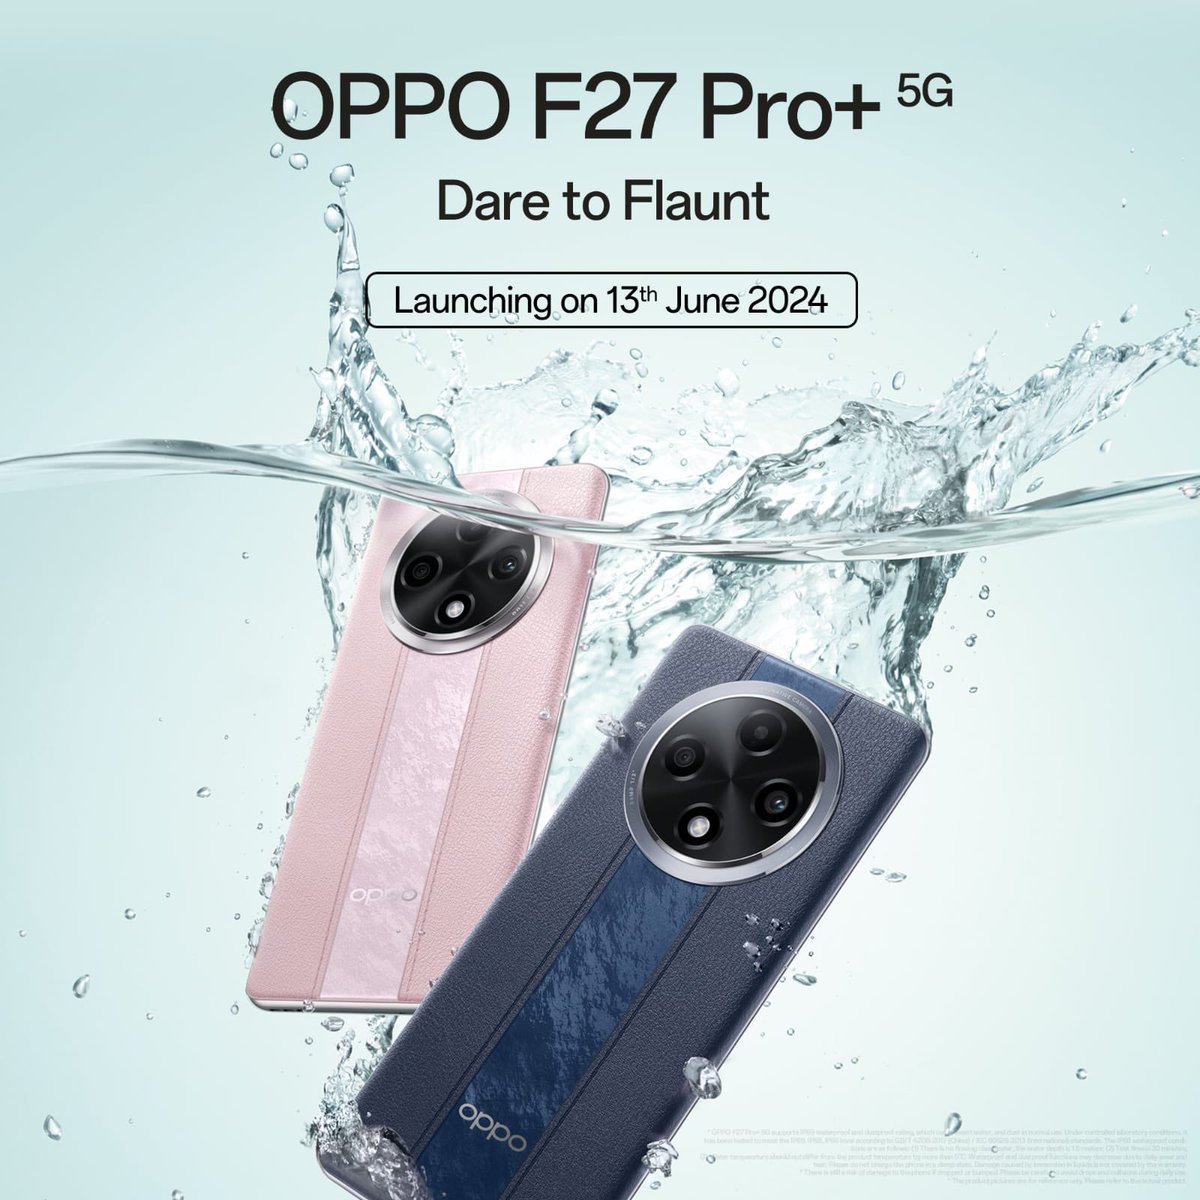 Oppo F27 Pro+ Launching On 13 June 2024 In India 🇮🇳 

#Oppo #OppoF27ProPlus